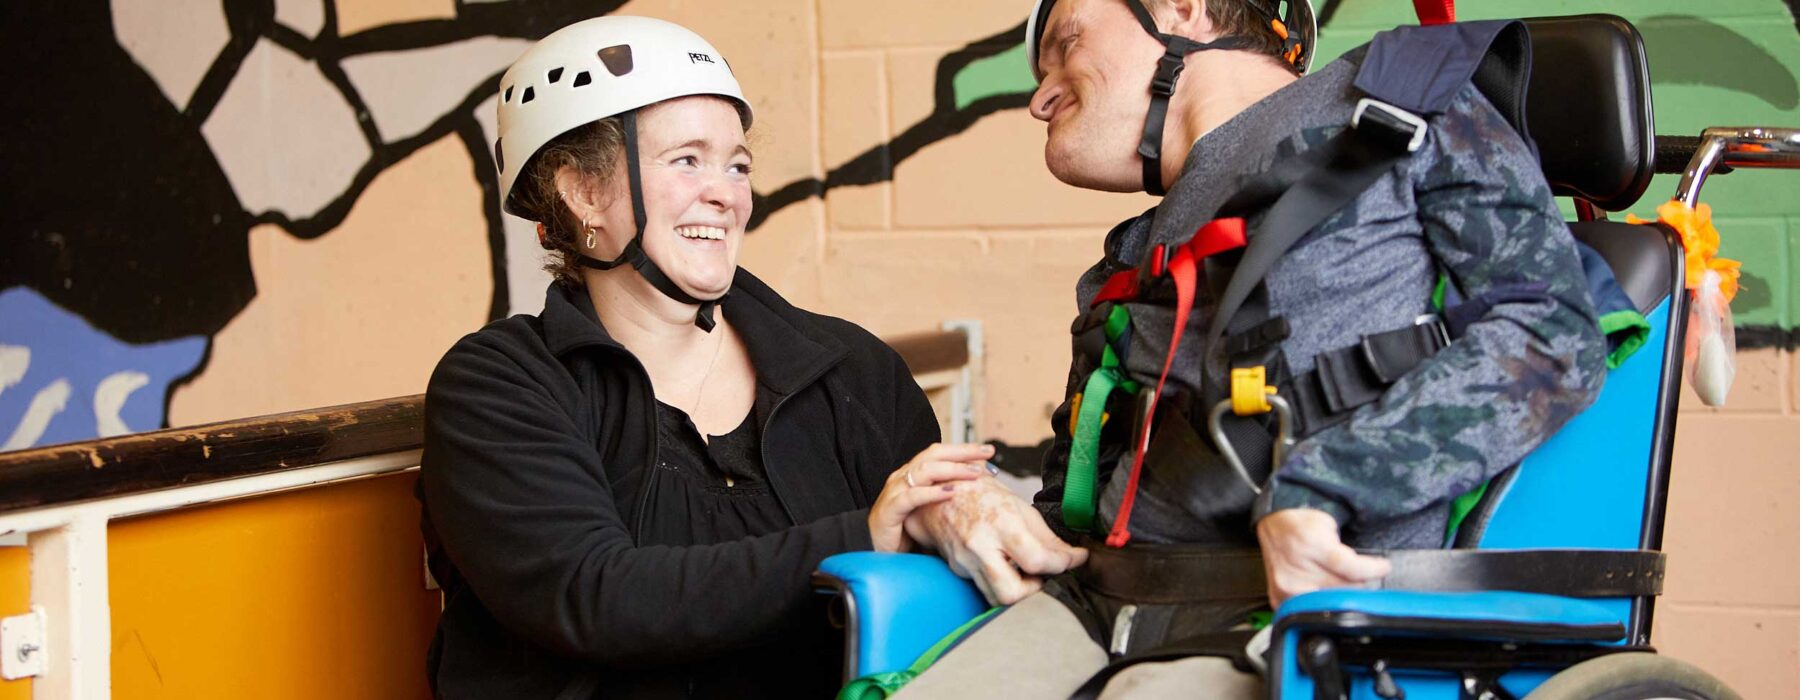 A woman kneels next to a man in a wheelchair. Both are wearing hard hats for climbing.